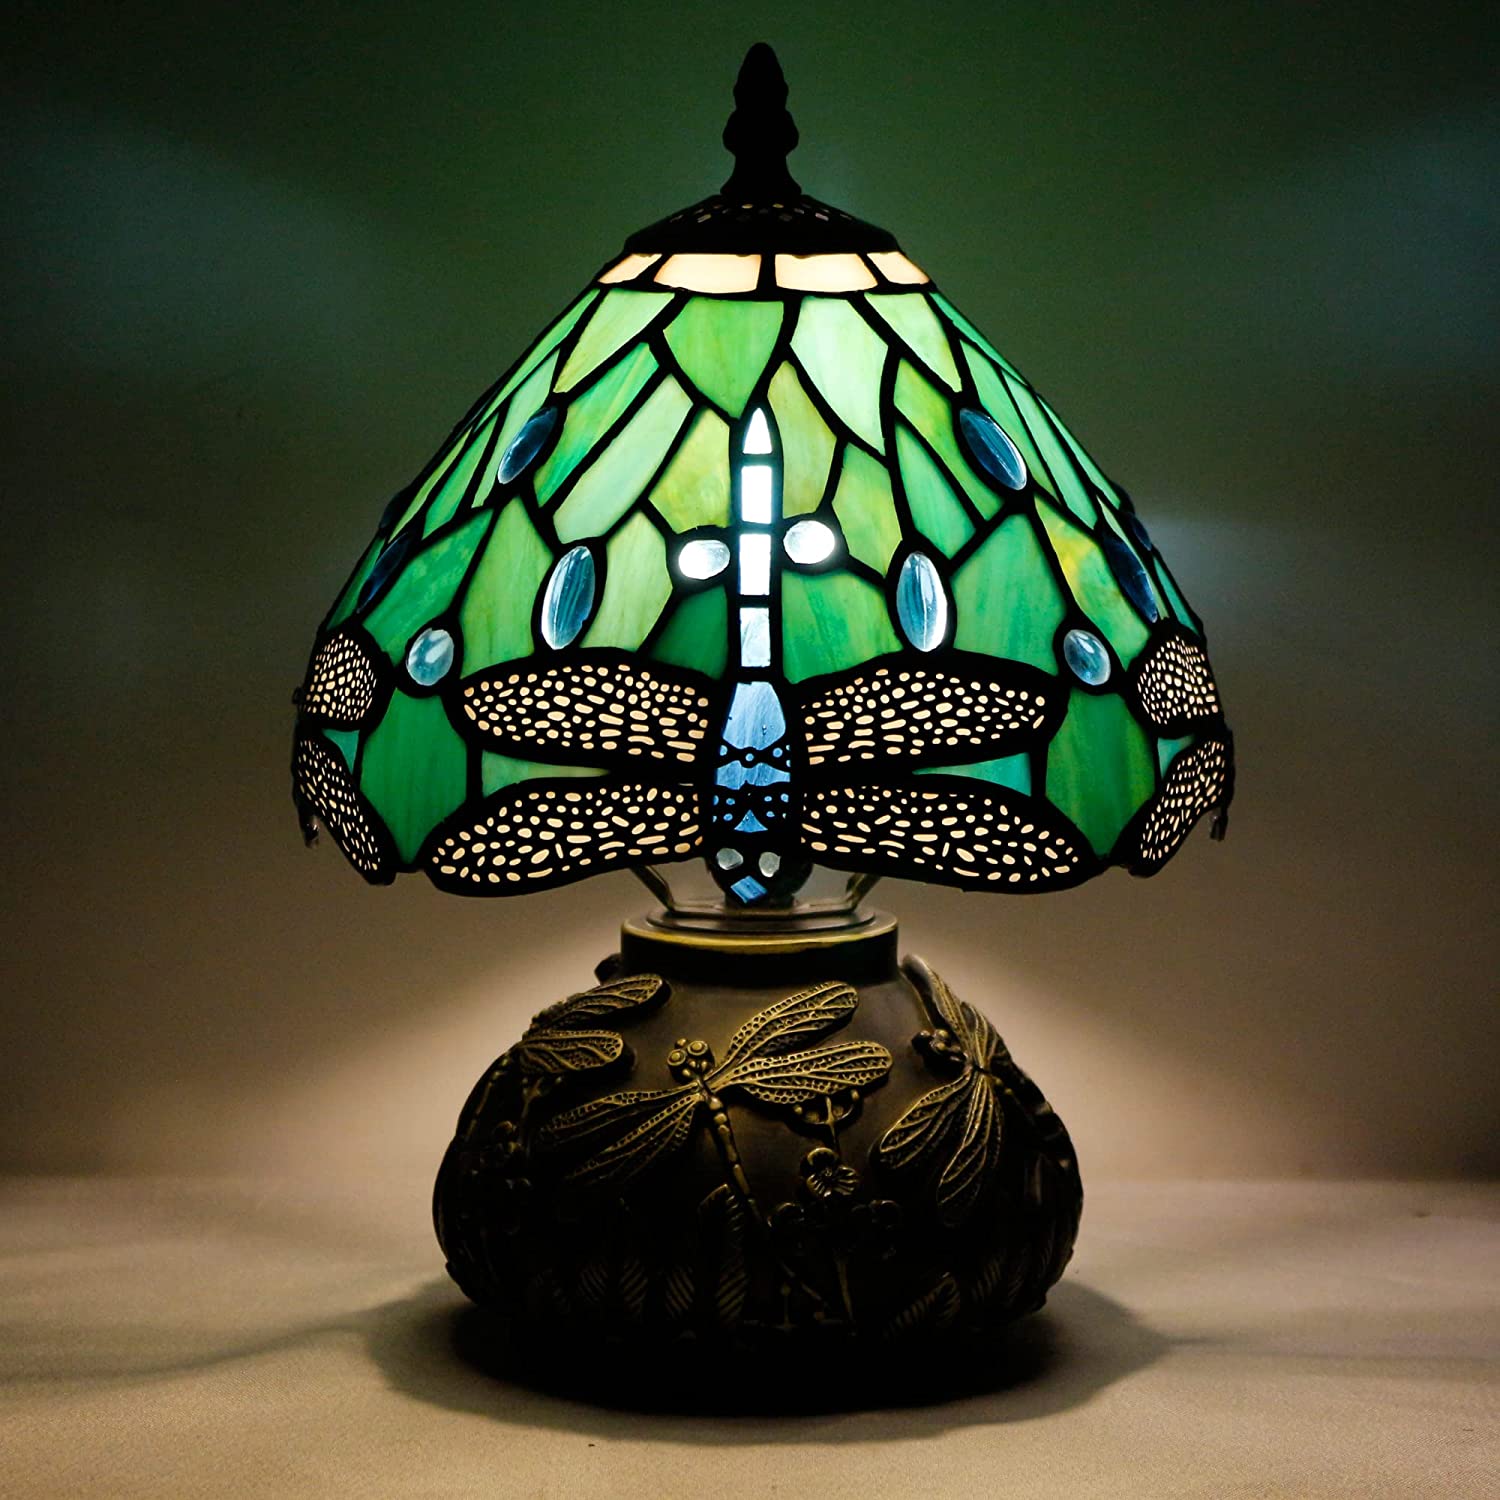 Werfactory® Tiffany Table Lamp Green Dragonfly Style Stained Glass Lamp Mushroom Lamp